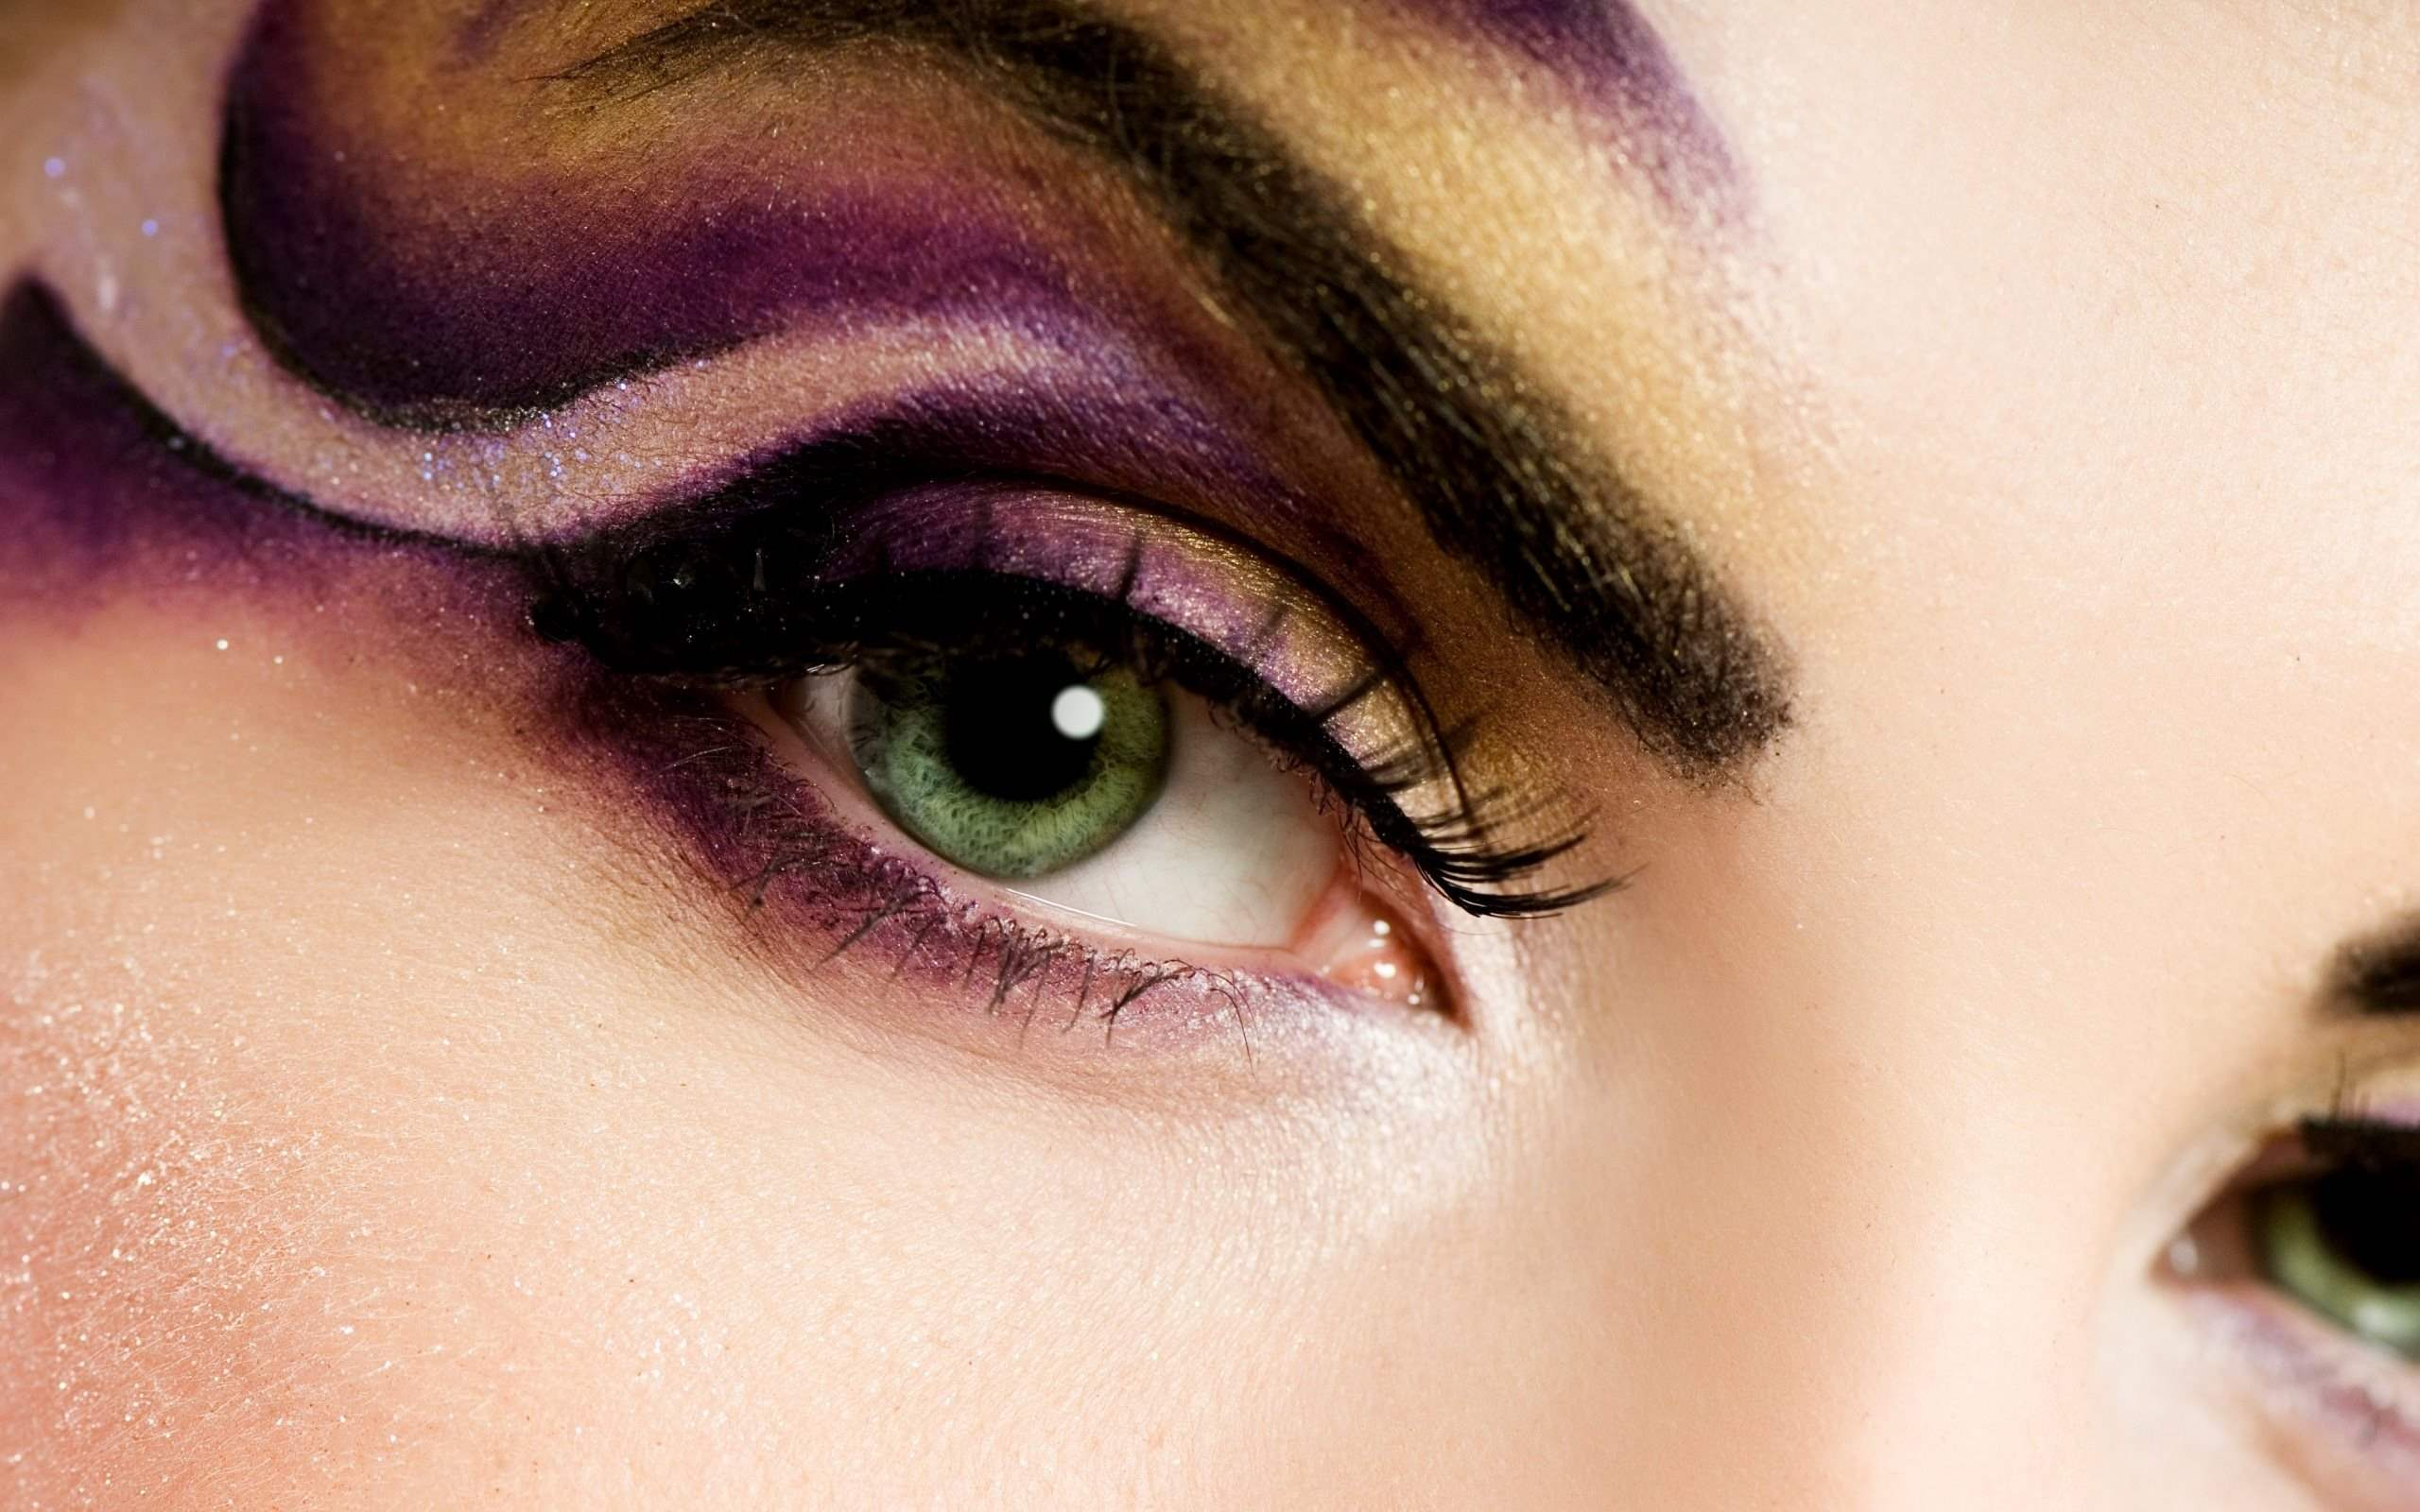 Makeup Designs For Eyes Creative Eye Makeup Looks And Design Ideas Page 3